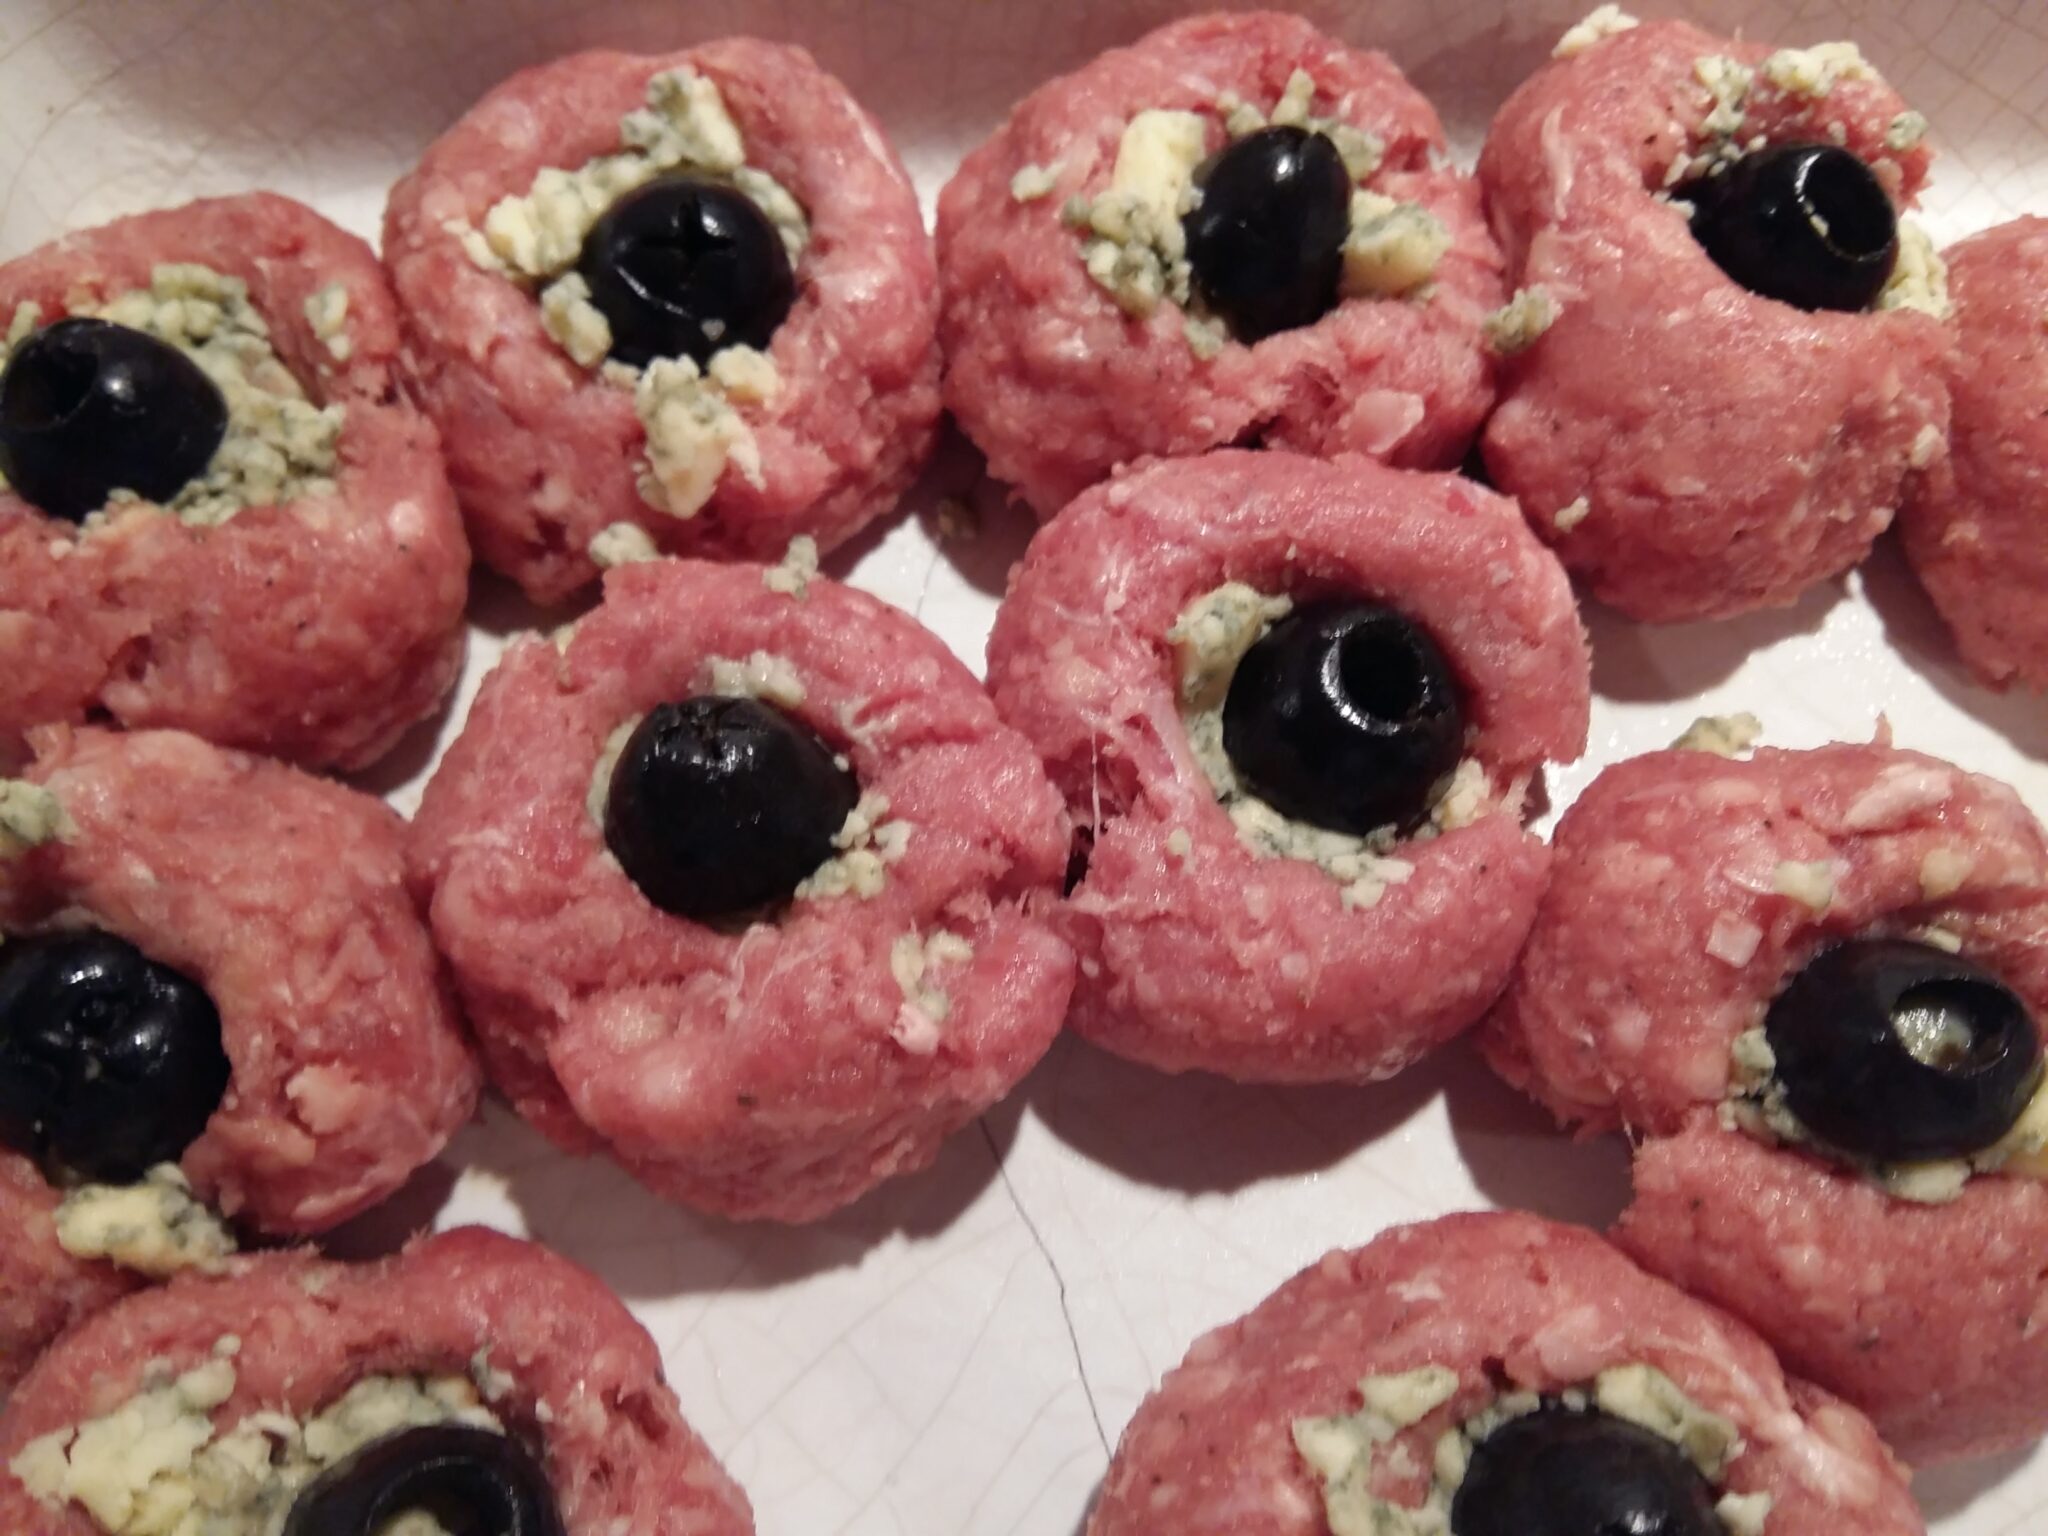 Meatballs stuffed with cheese and olives